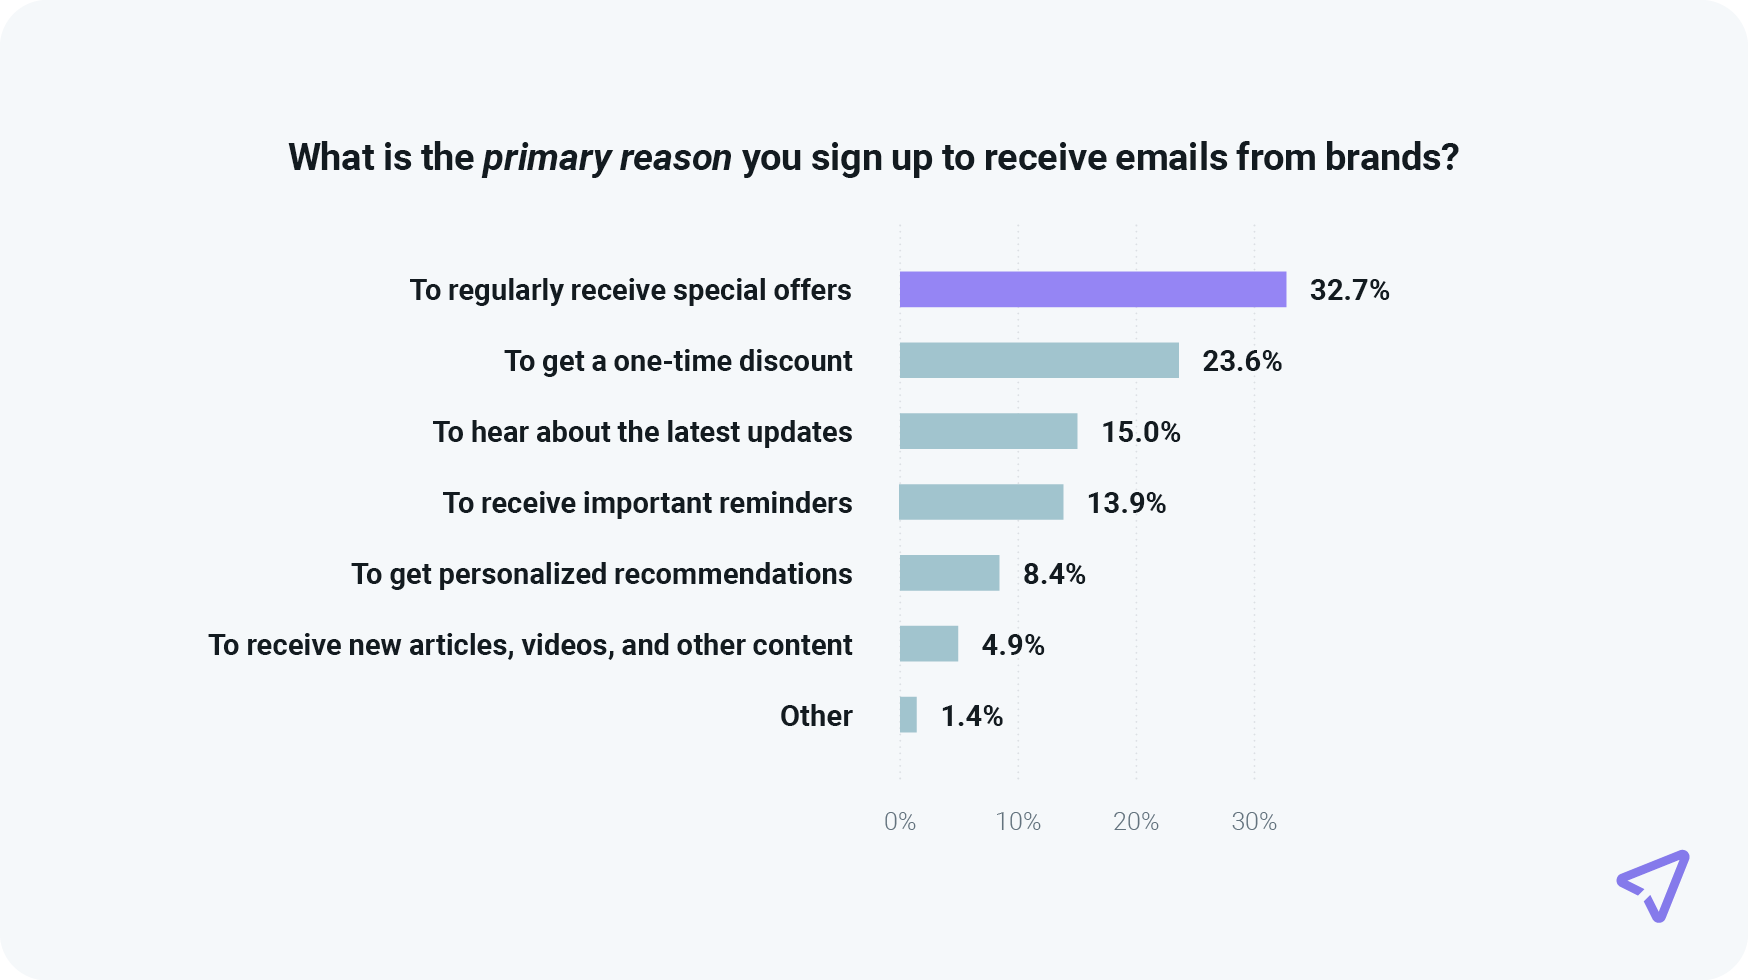 Chart shows top reasons people sign up for emails